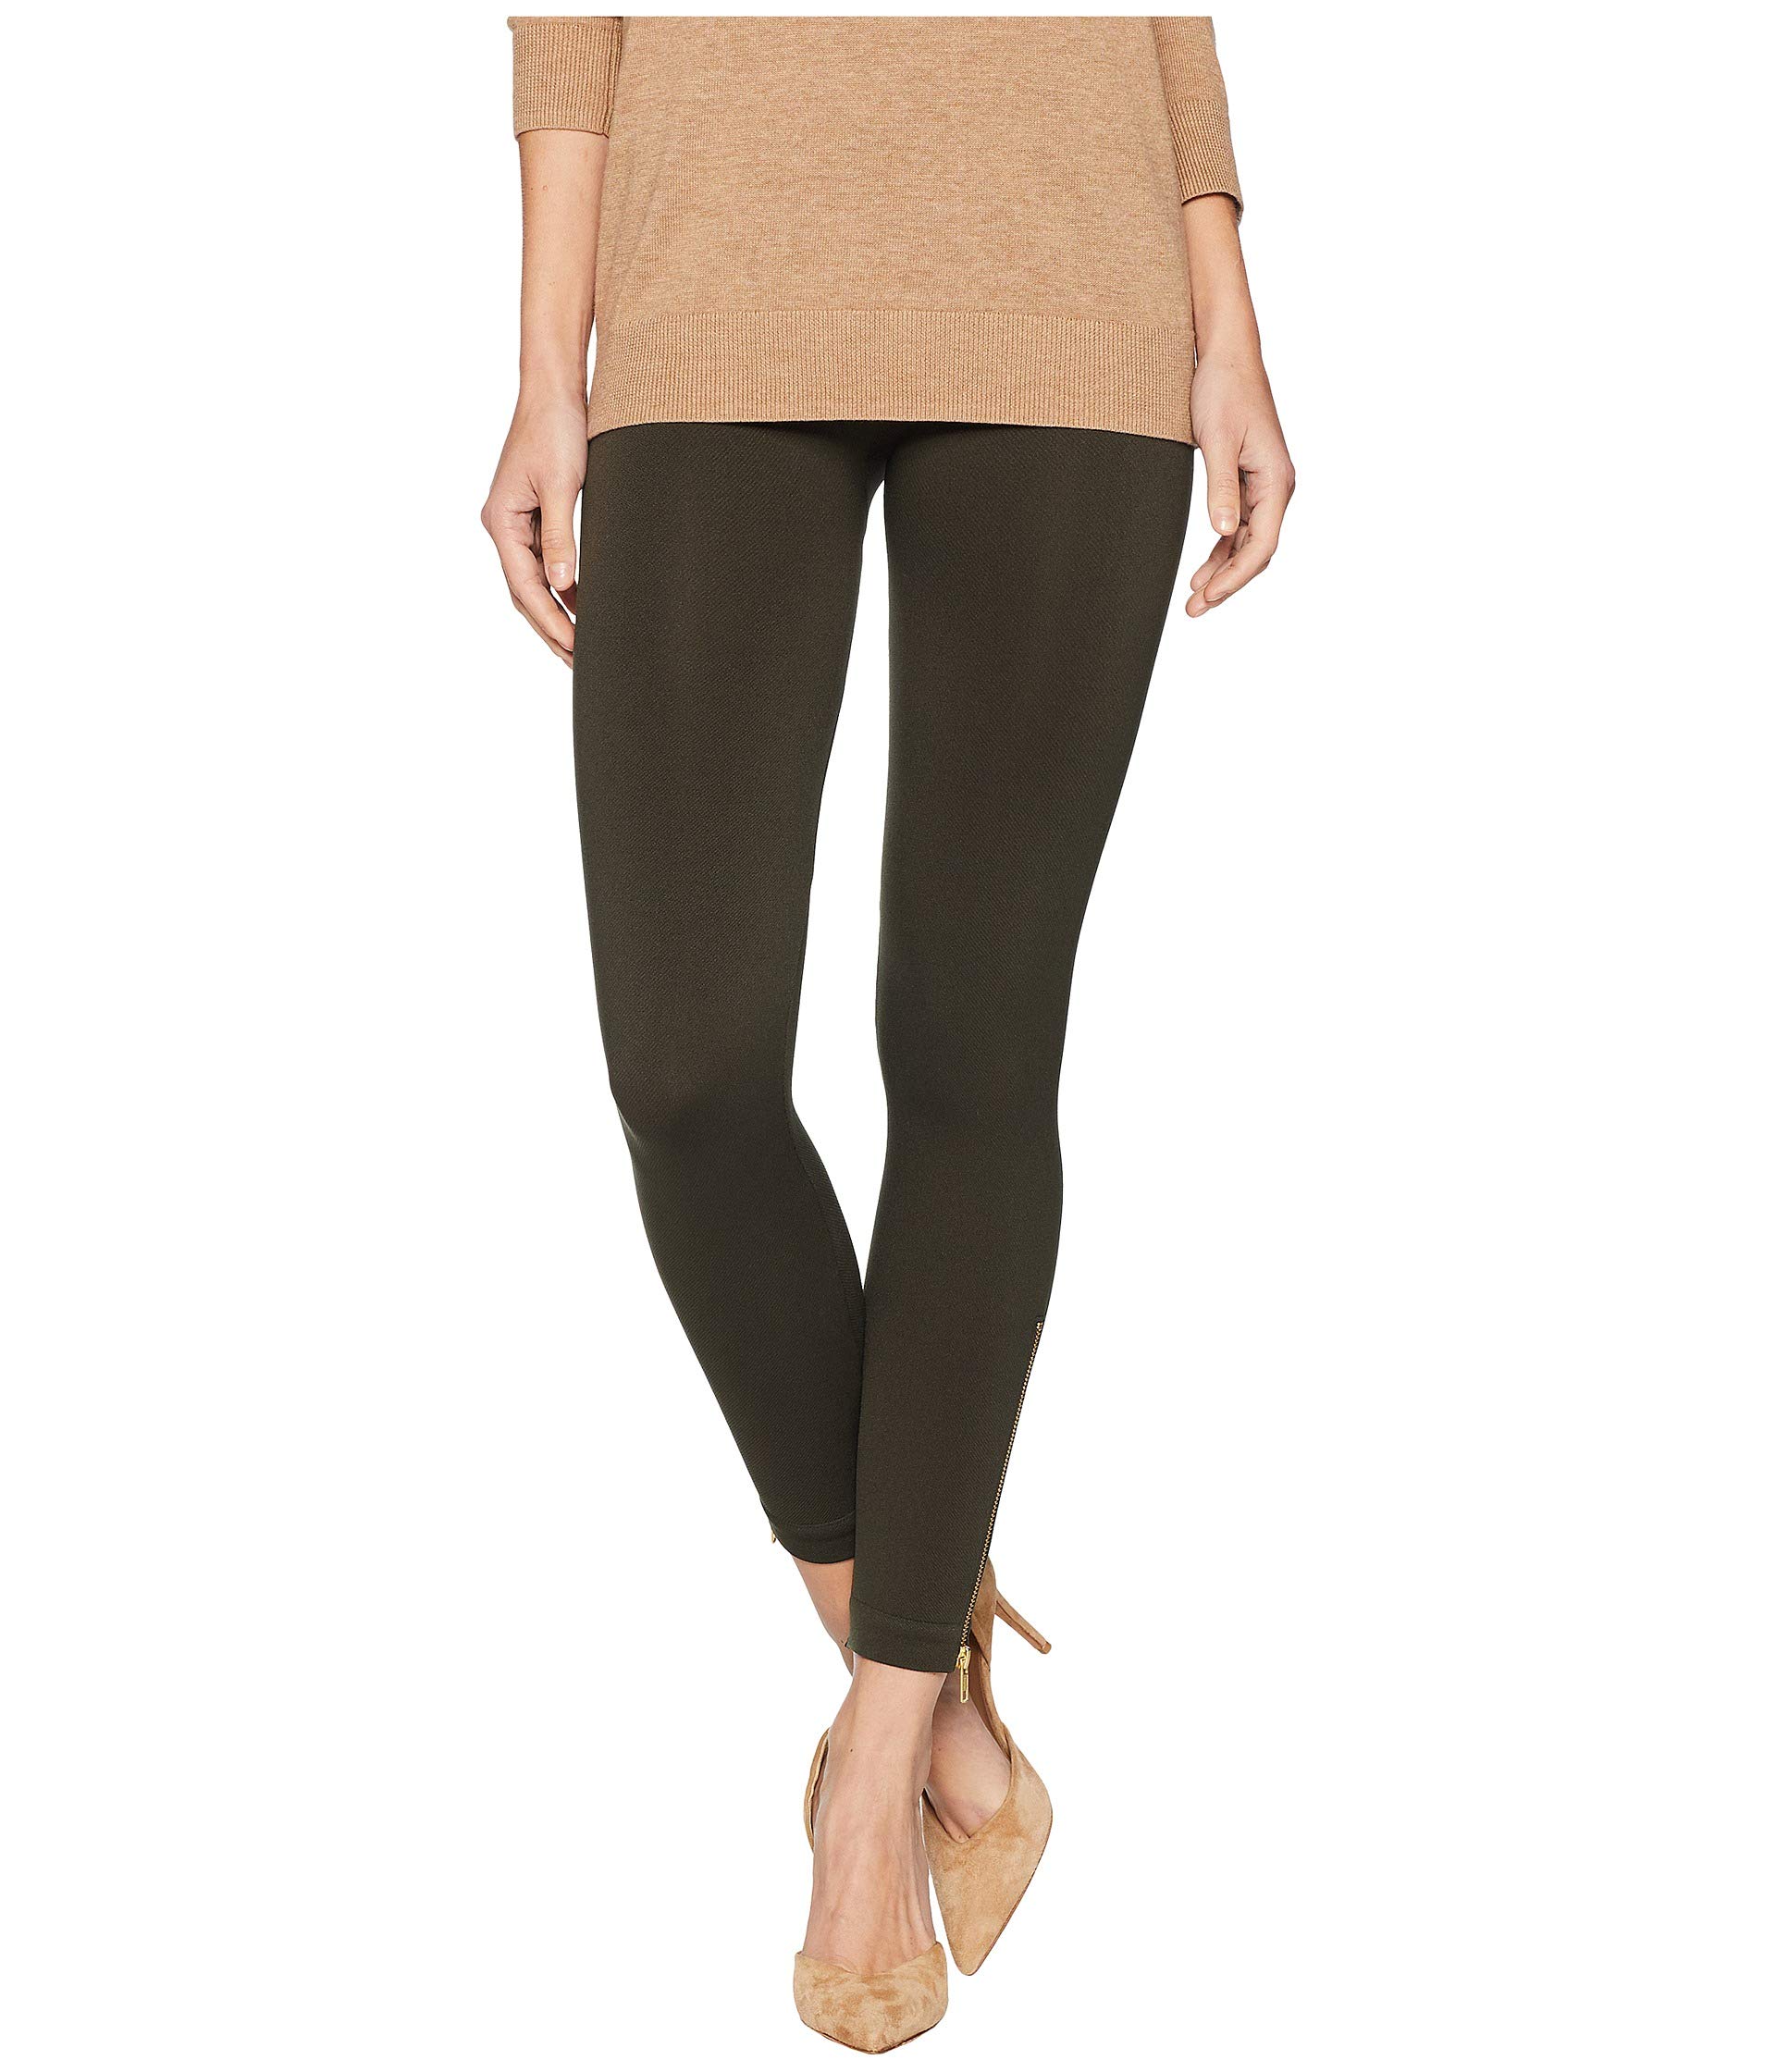 Spanx Faux Leather Leggings are 30 percent off right now